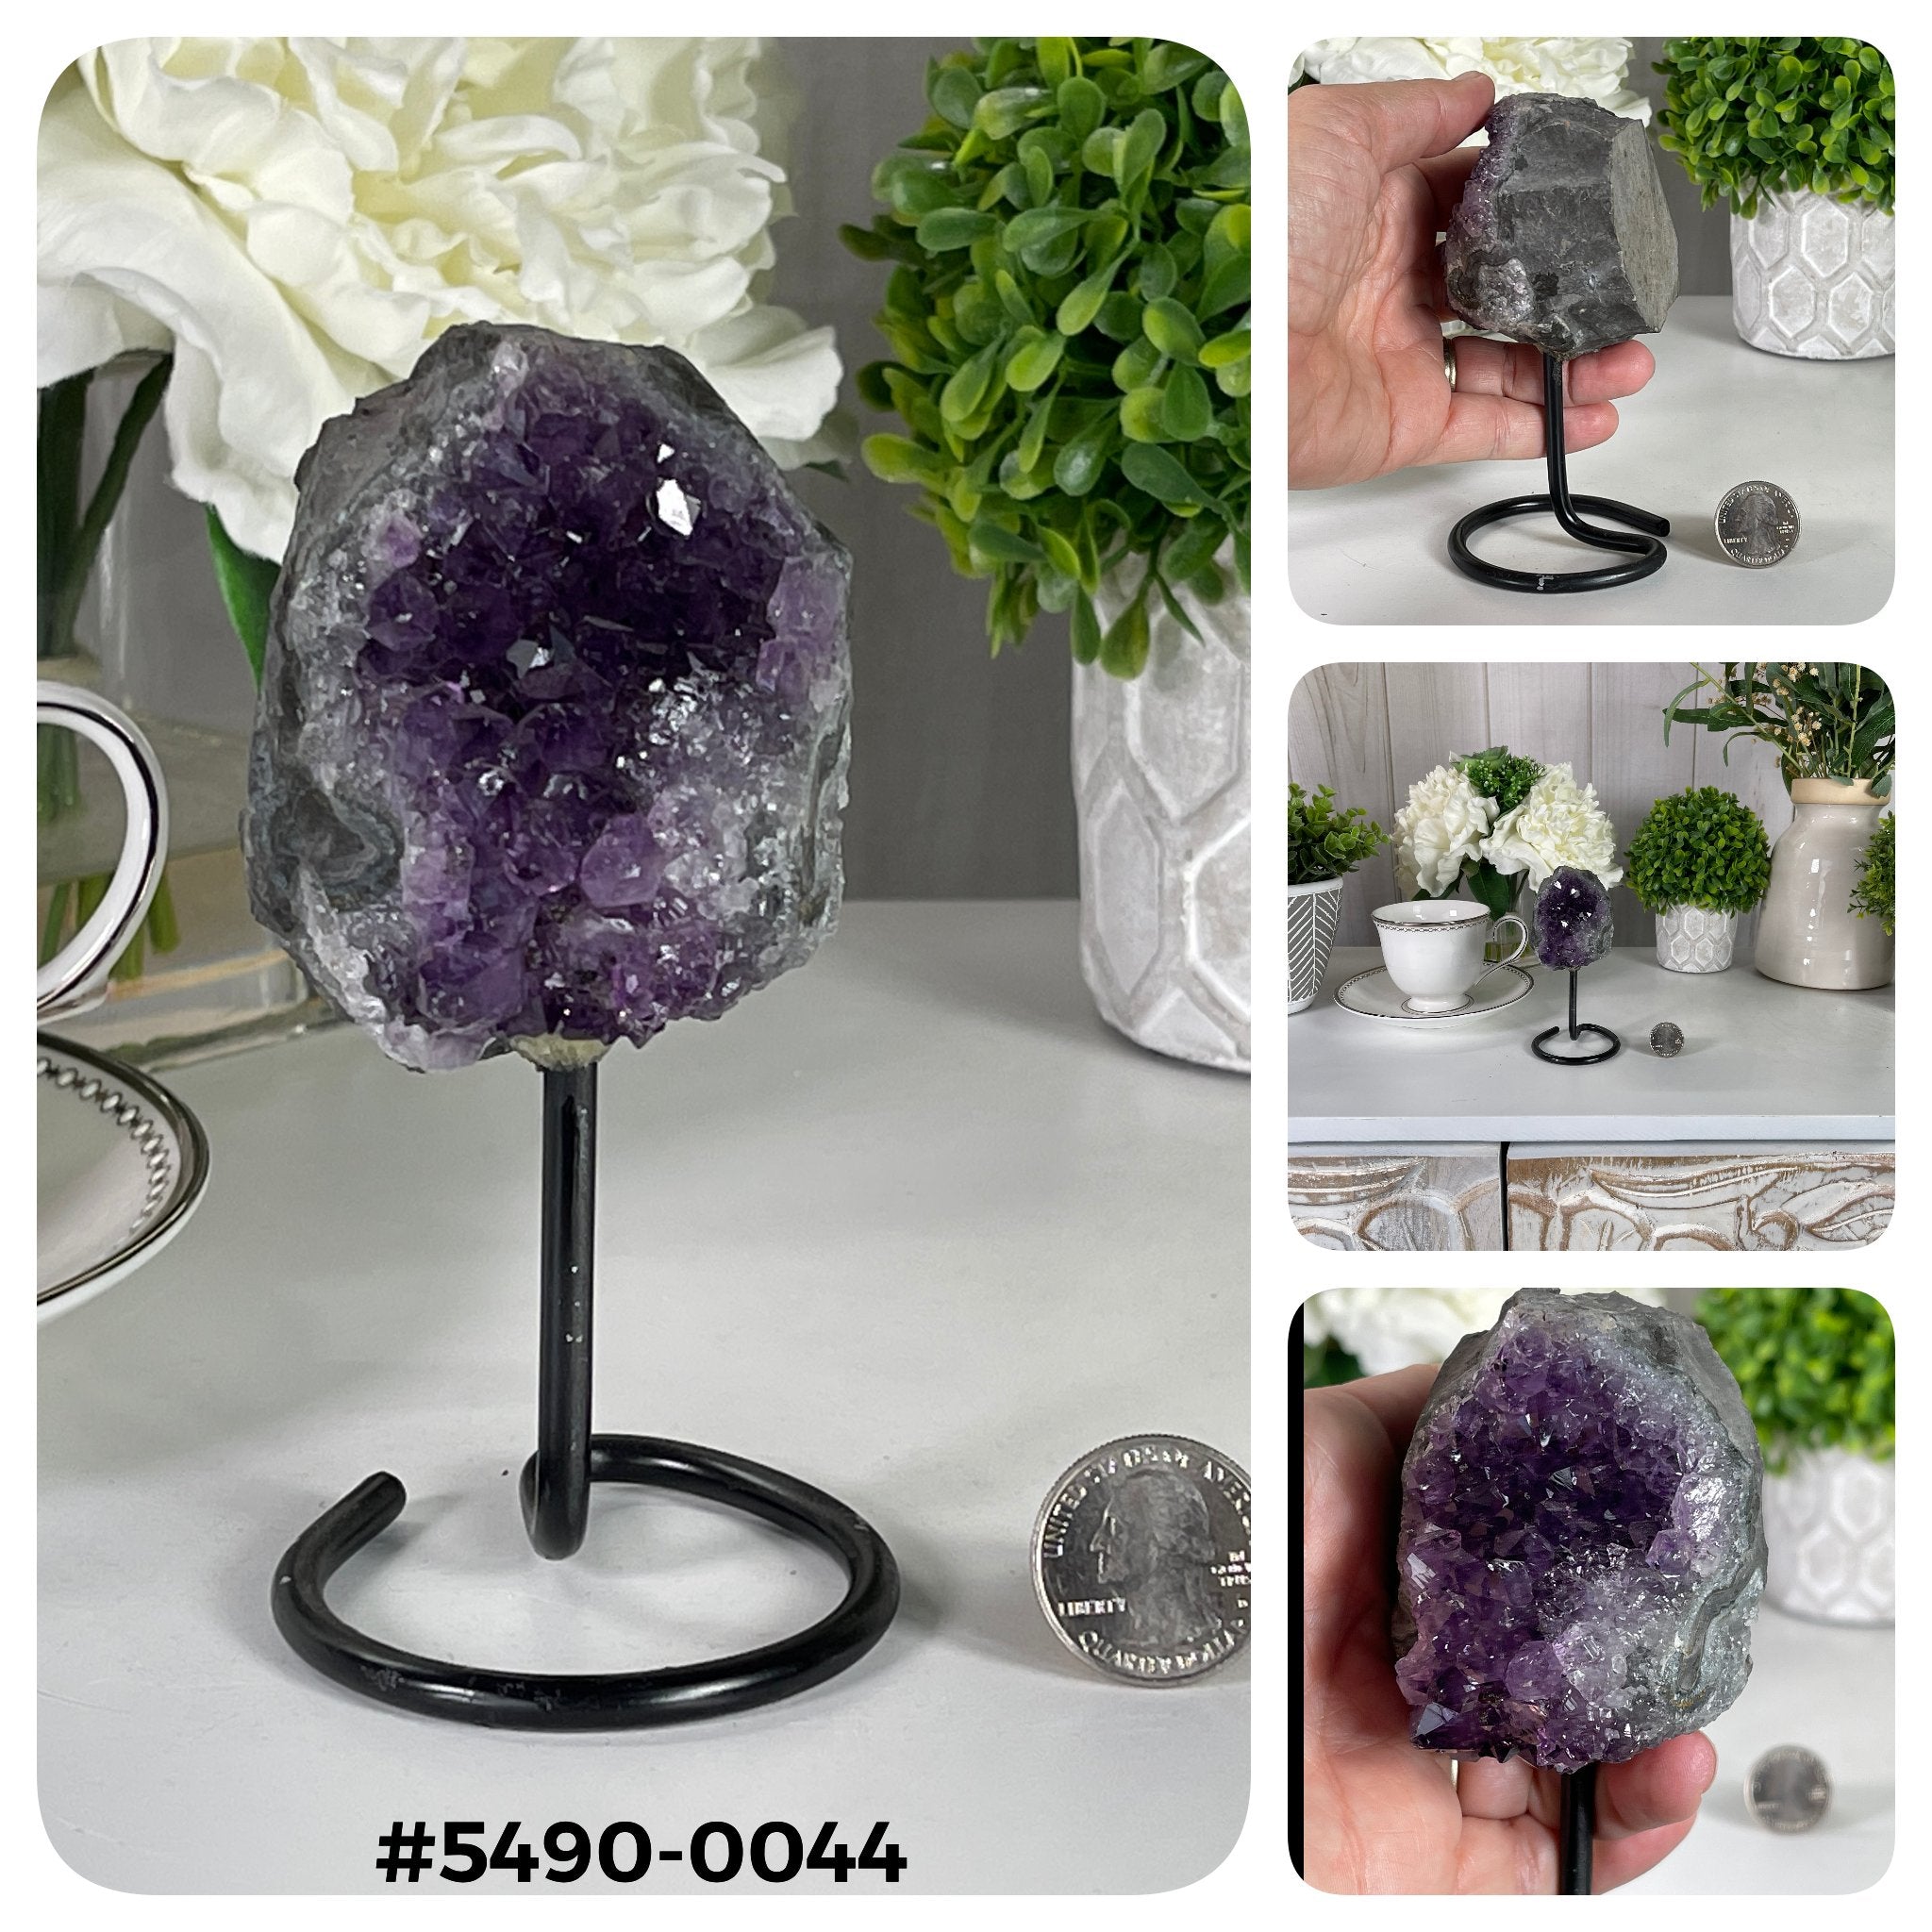 Small Amethyst Cluster on a Metal Stand, Various Options #5490 - Brazil GemsBrazil GemsSmall Amethyst Cluster on a Metal Stand, Various Options #5490Small Clusters on Metal Bases5490-0044